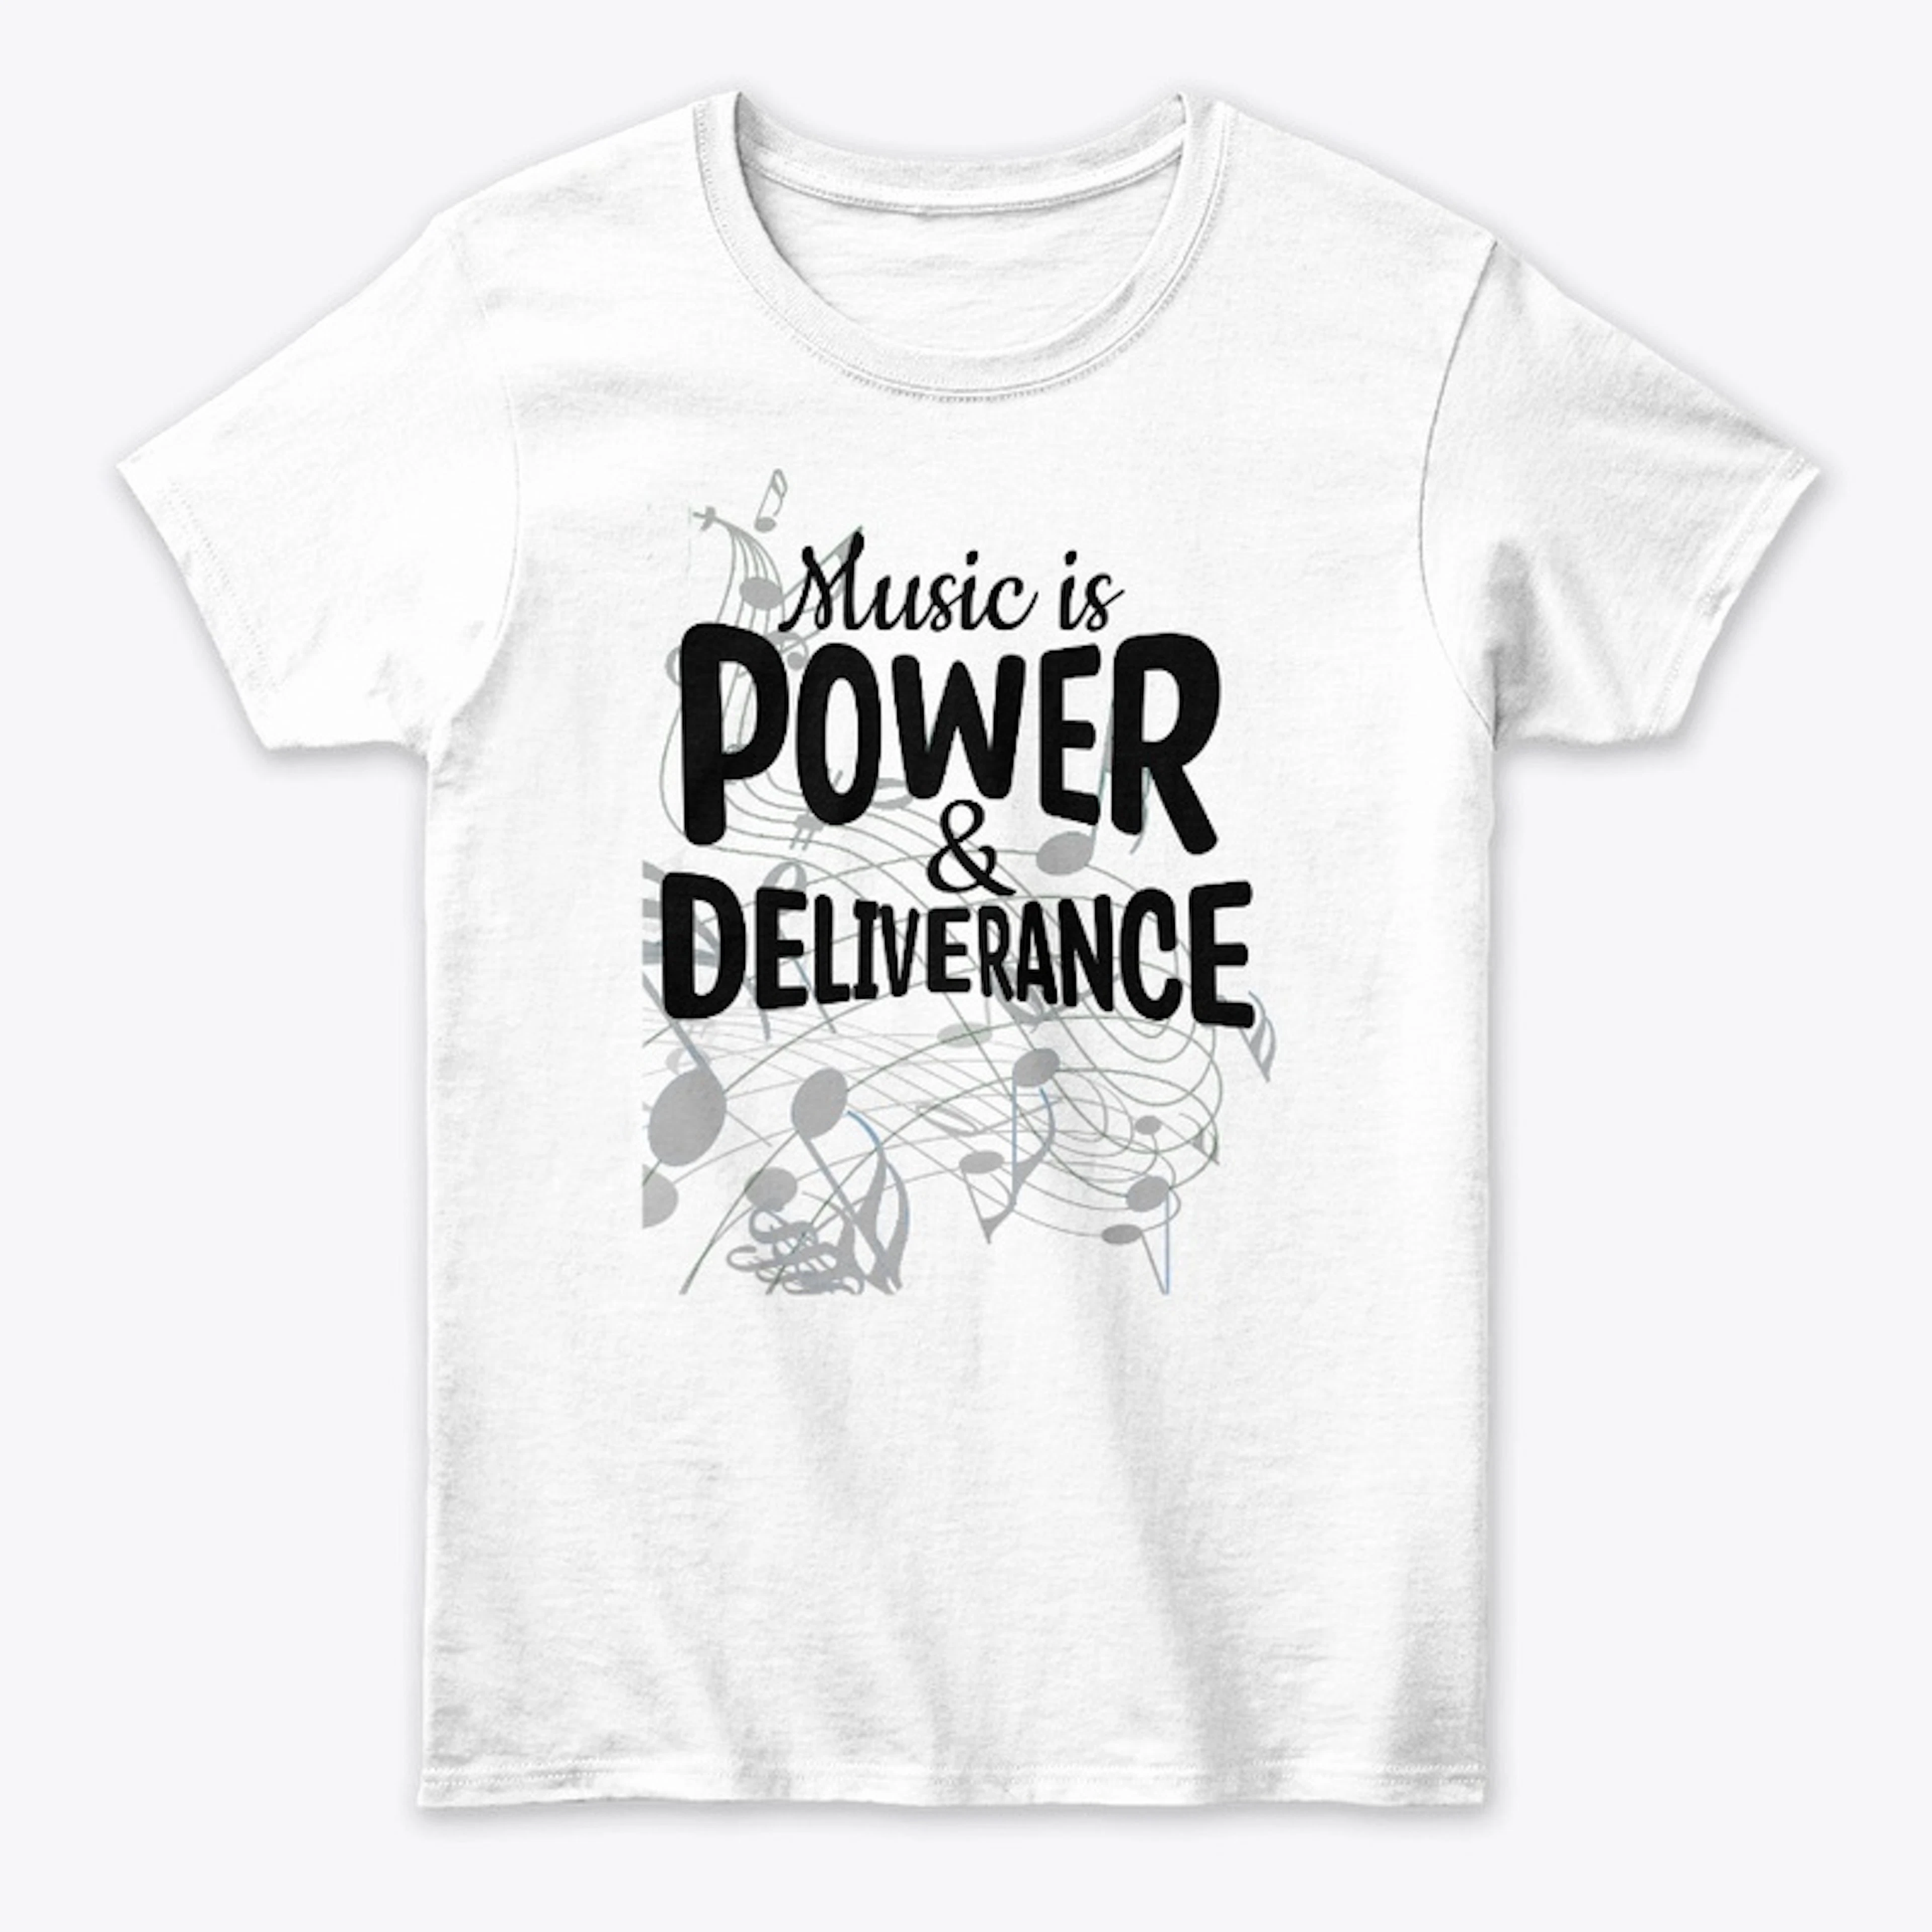 Music is Power & Deliverance Alternate